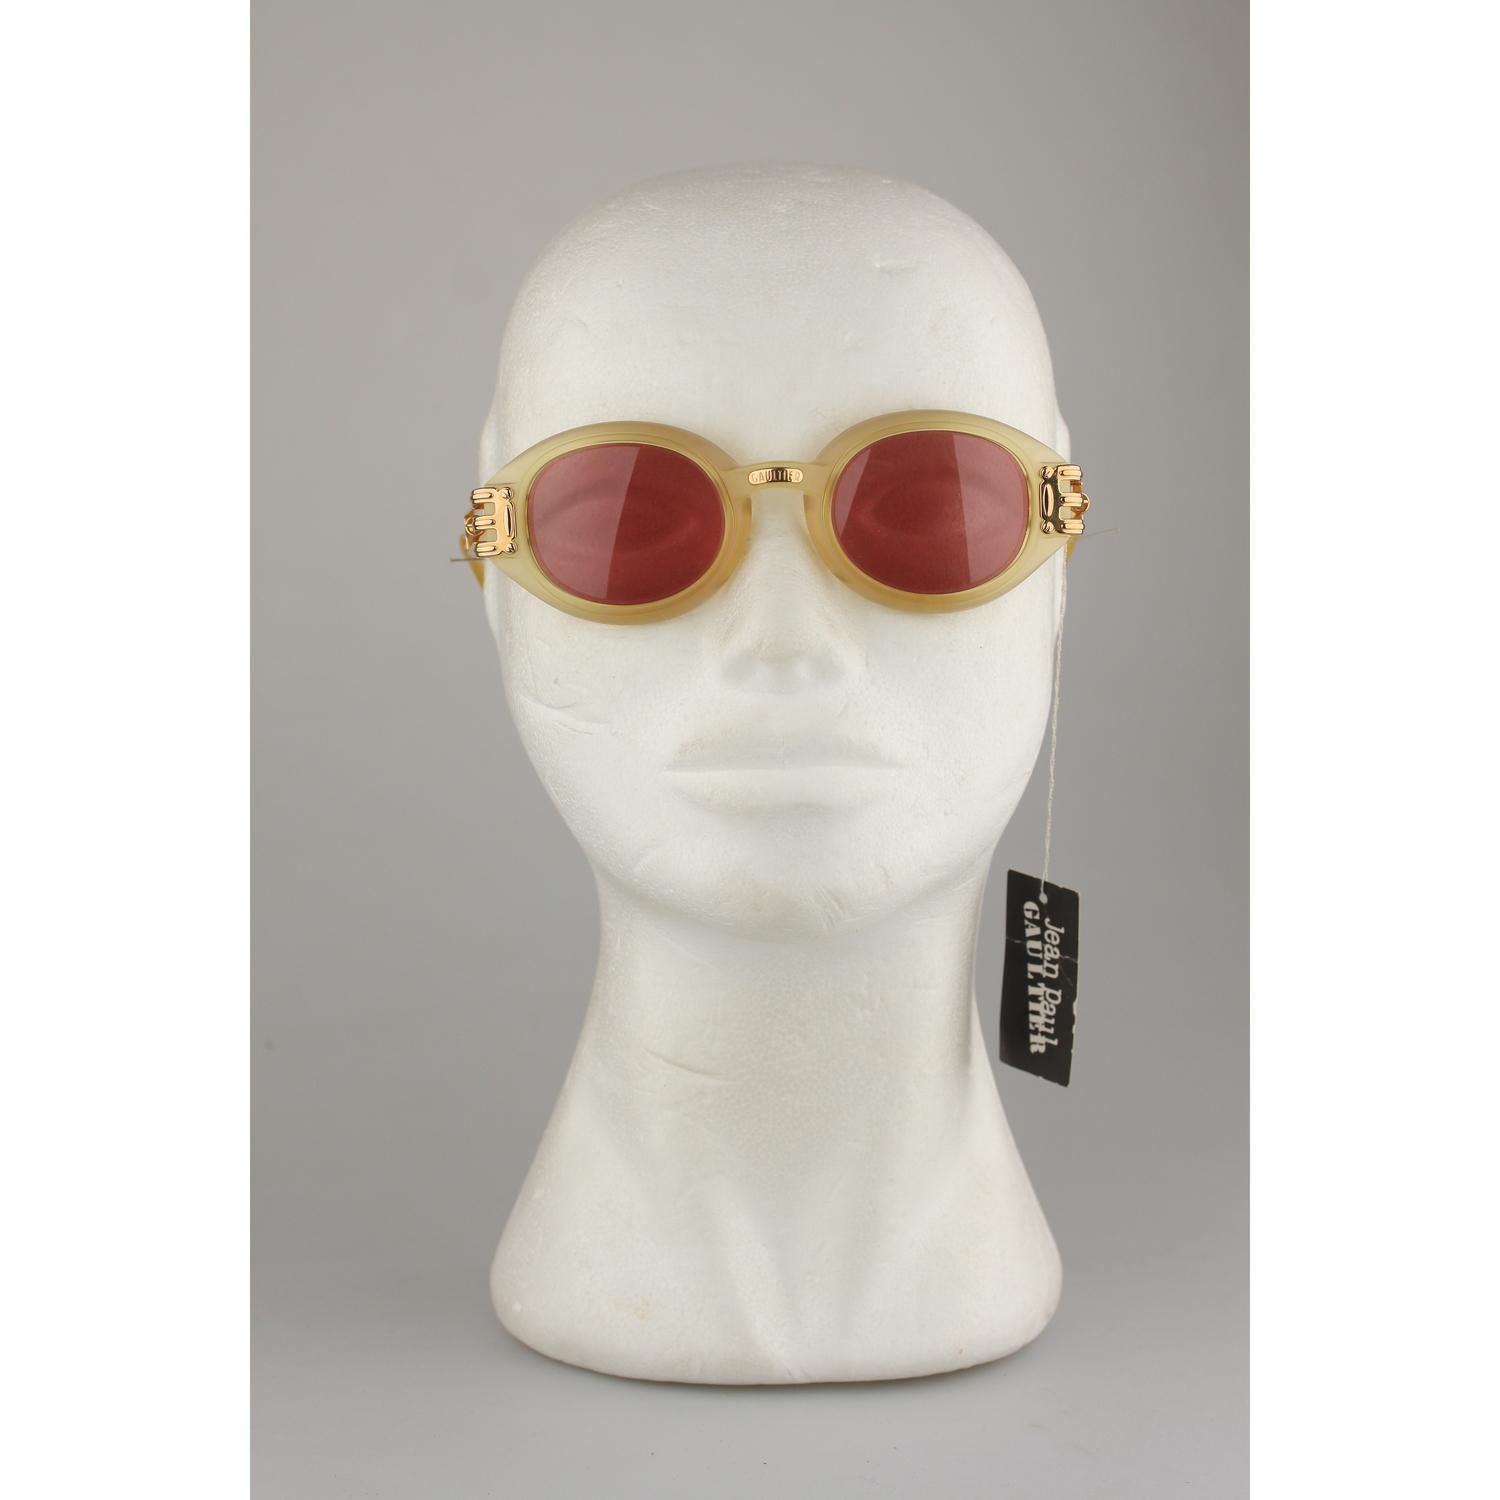 Jean Paul Gaultier Vintage Gold Oval Sunglasses 56-5203 New Old Stock 6